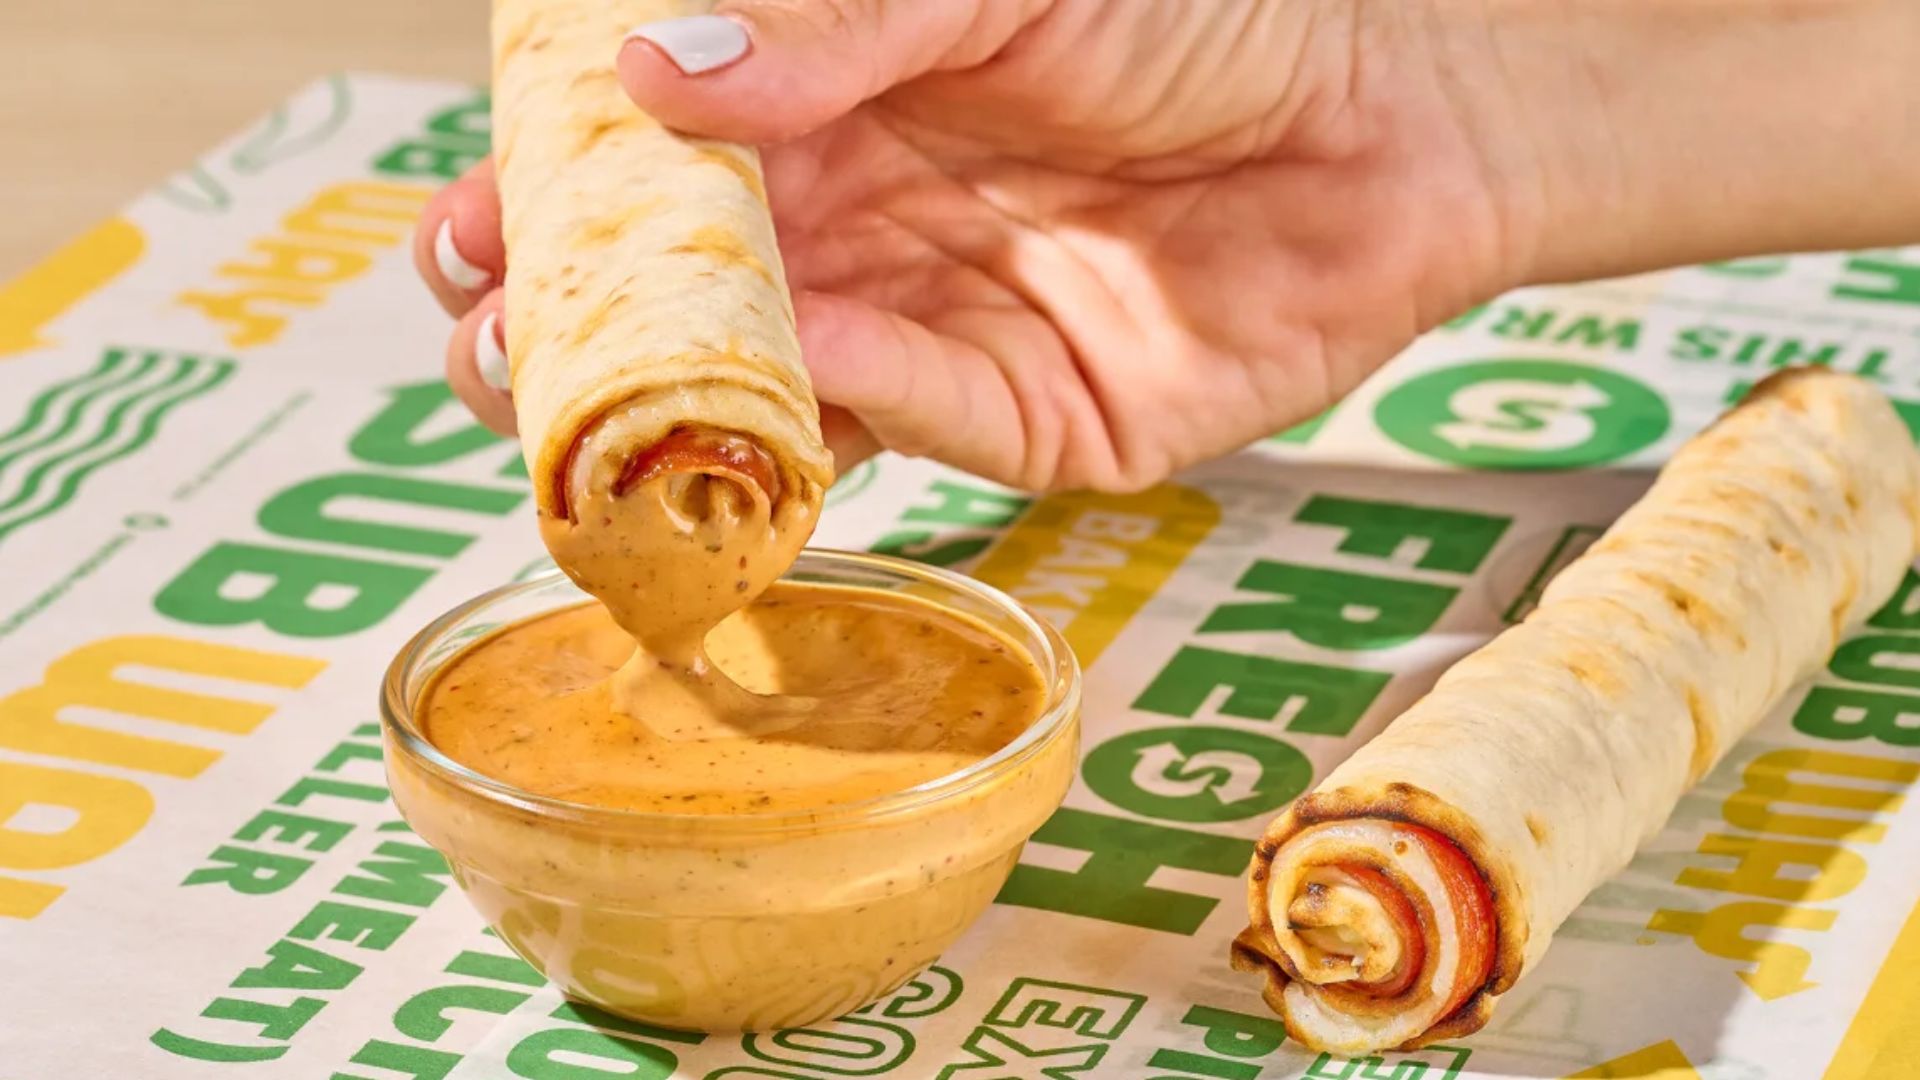 Subway is expanding its menu with more footlong snacks